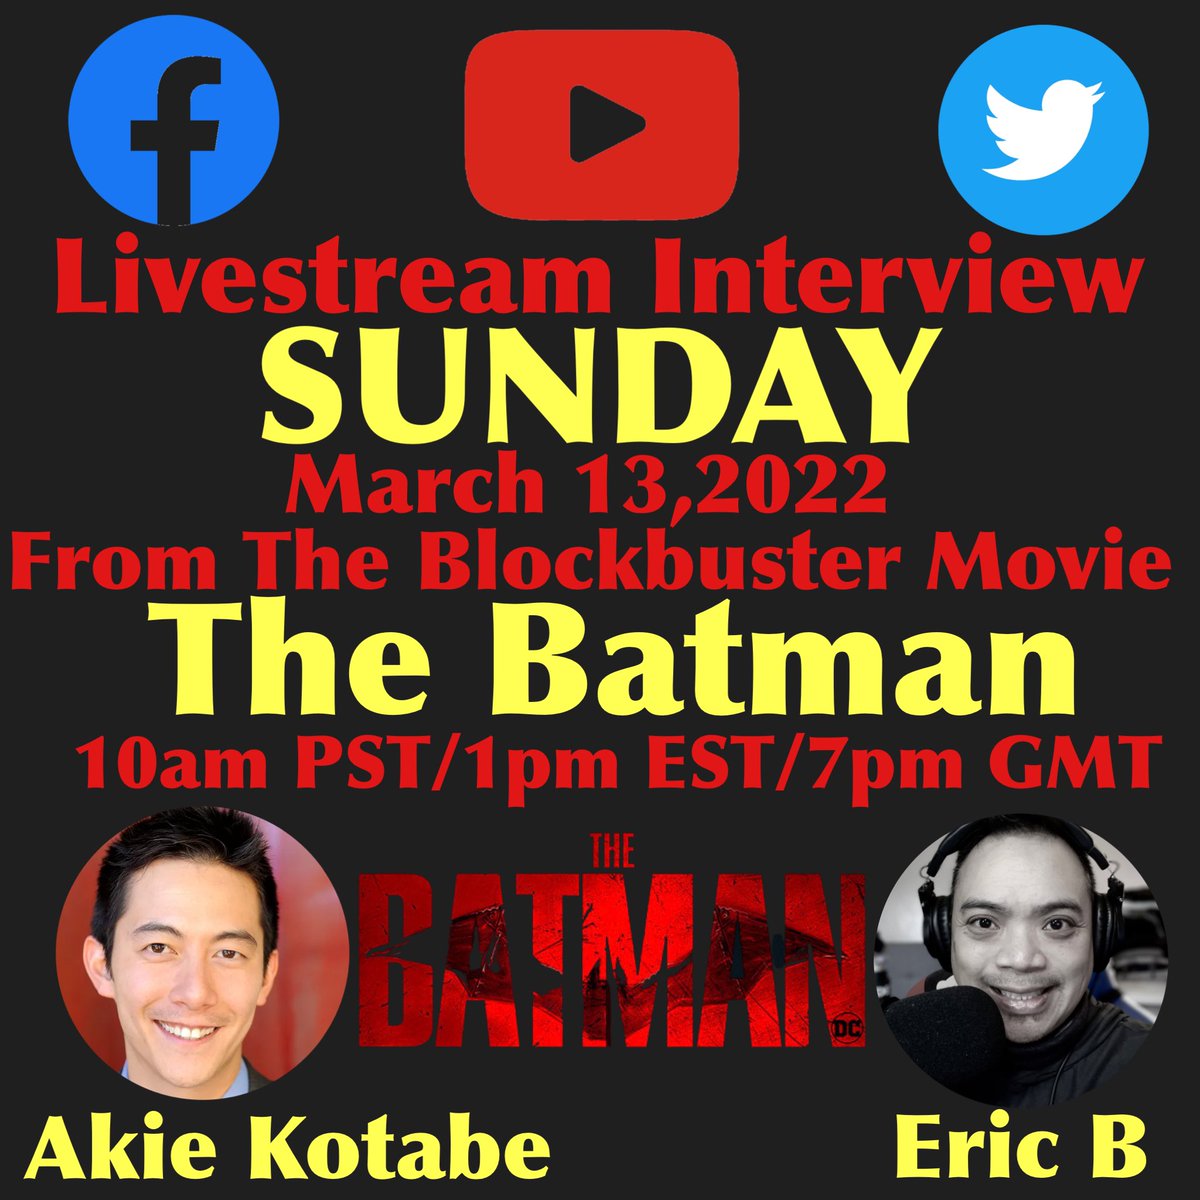 Join me this Sunday. March 13, 10am PST/1pm EST/7pm GMT Streaming live on four platforms. #Facebook #Youtube #Twitter and #Twitch From The Falcon and Winter Solider, Venom:Let there be carnage and Wonder Woman 1984 just to name a few. I’ll be interviewing The talented @akiekotabe https://t.co/WujBf2j25a